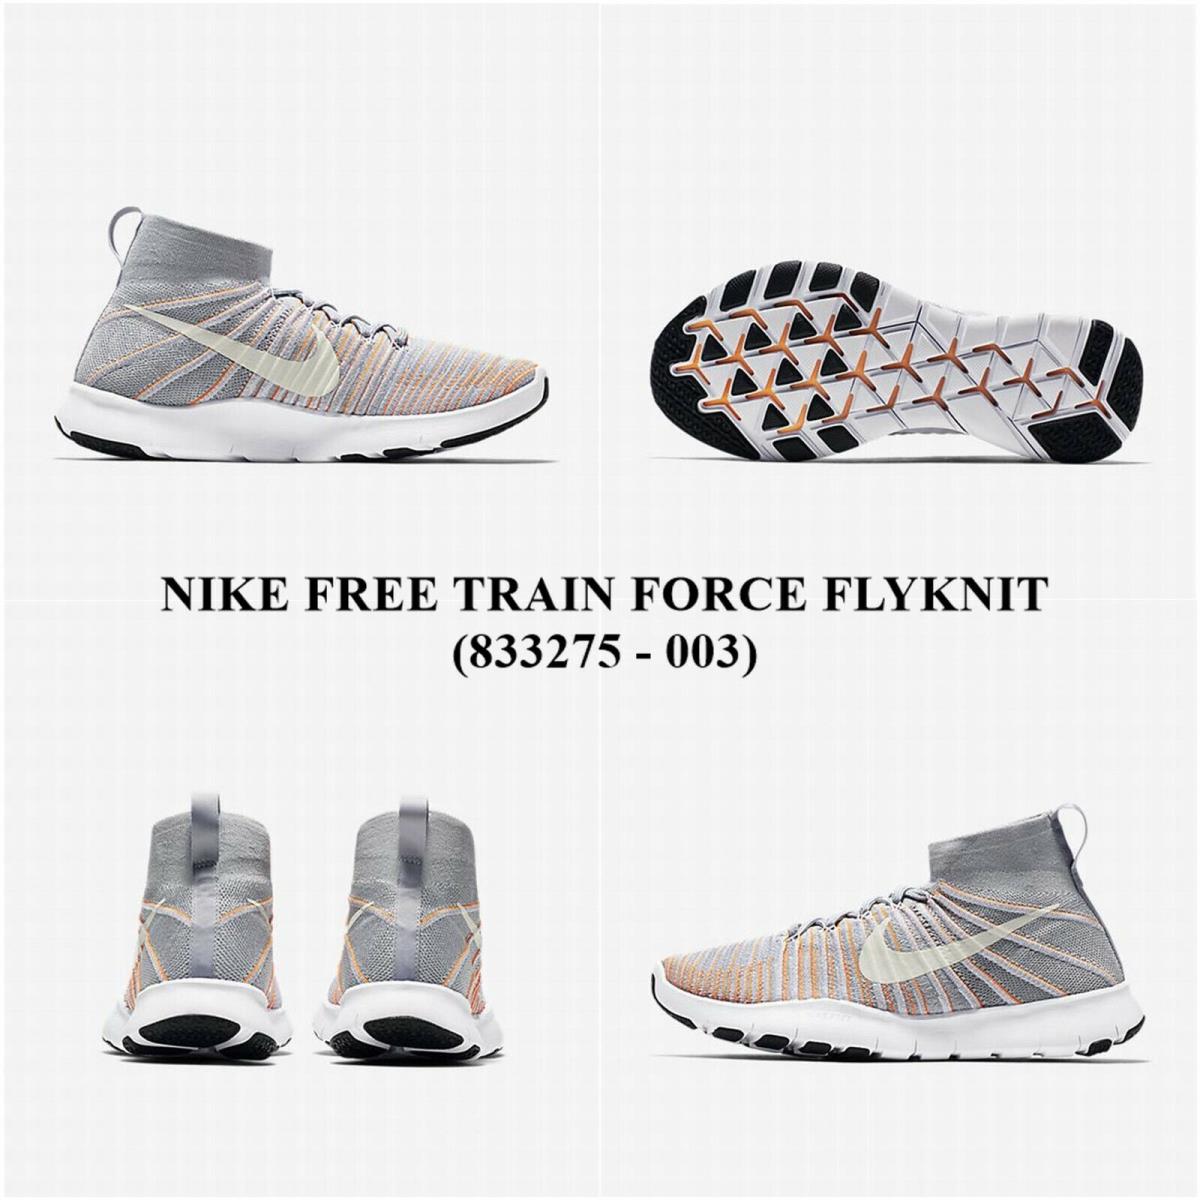 Nike Men`s Free Train Force Flyknit 833275 - 003 Trainning Shoes with Box - WOLF GREY / WHITE-TOTAL ORANGE